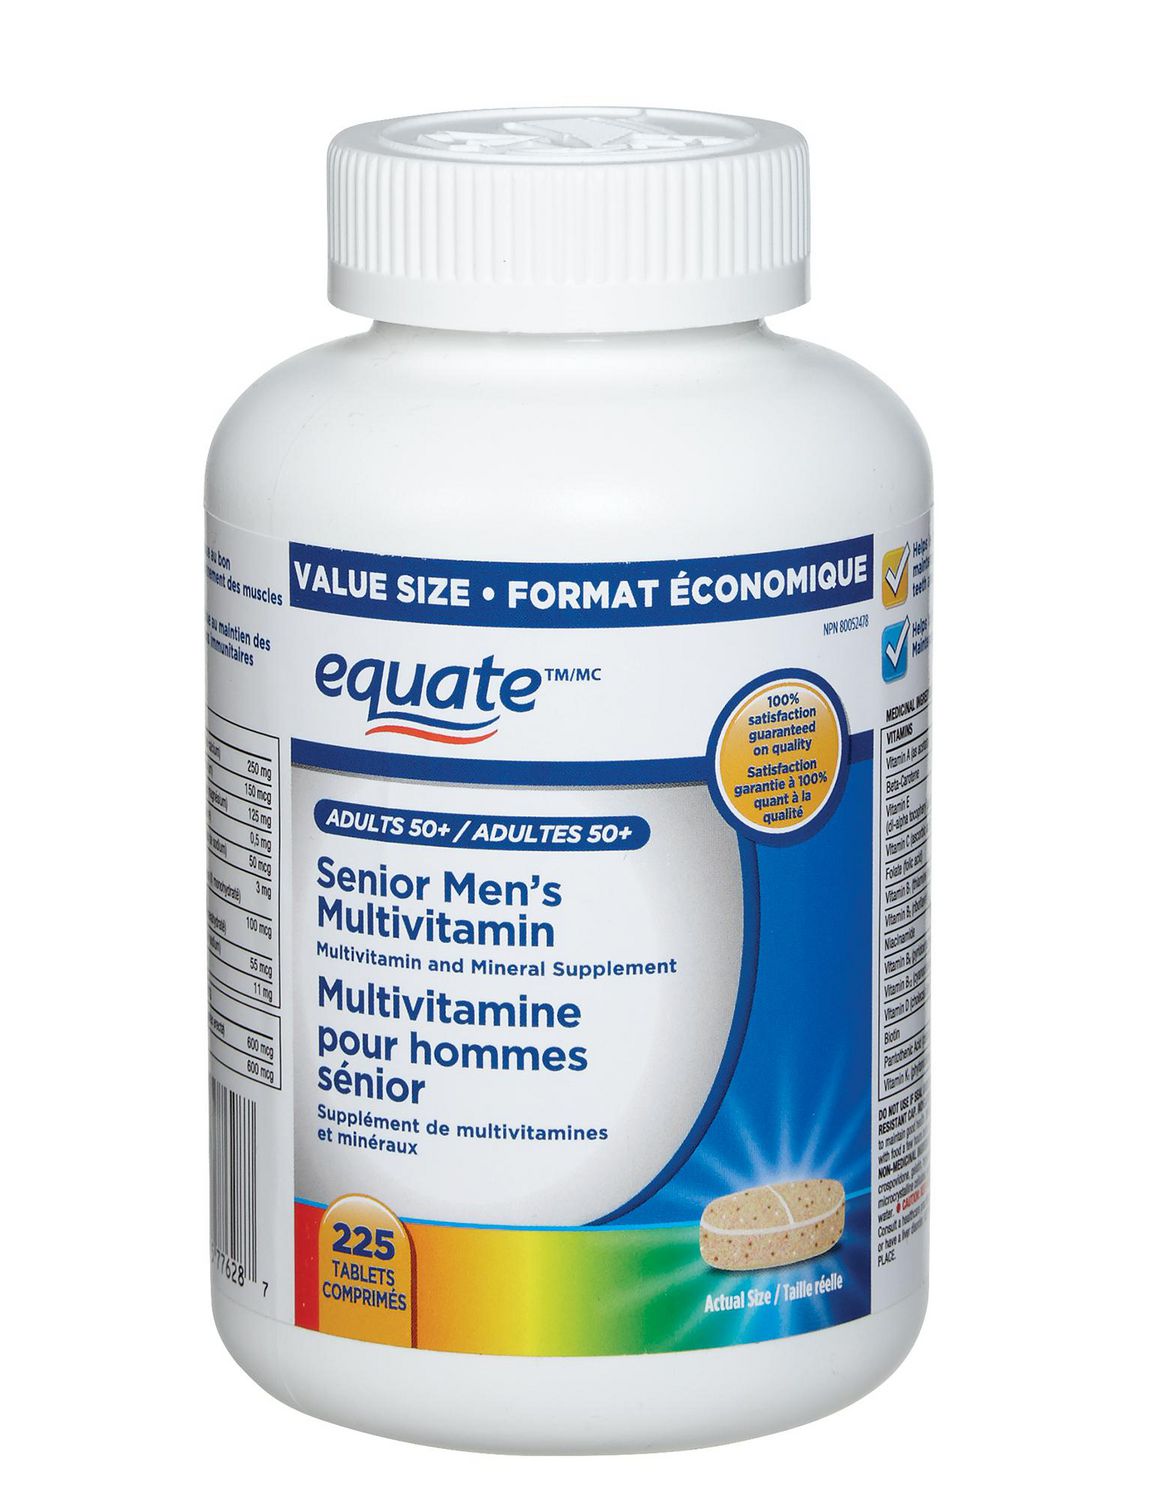 equate multivitamin how to use